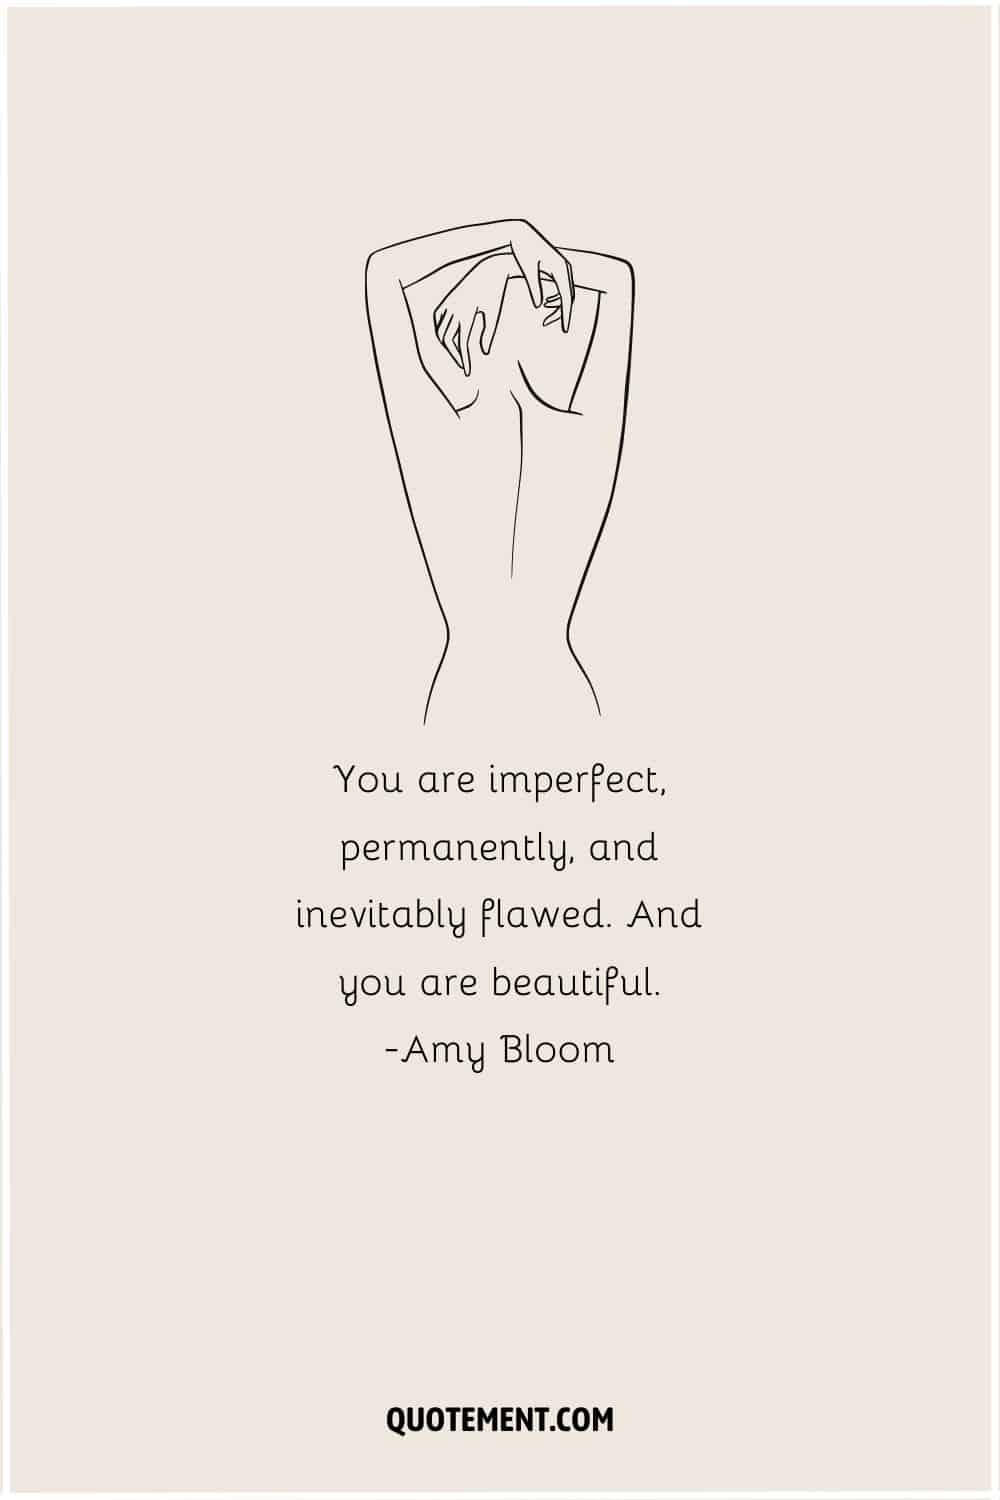 Inspirational body positive quote and illustration of a woman.
